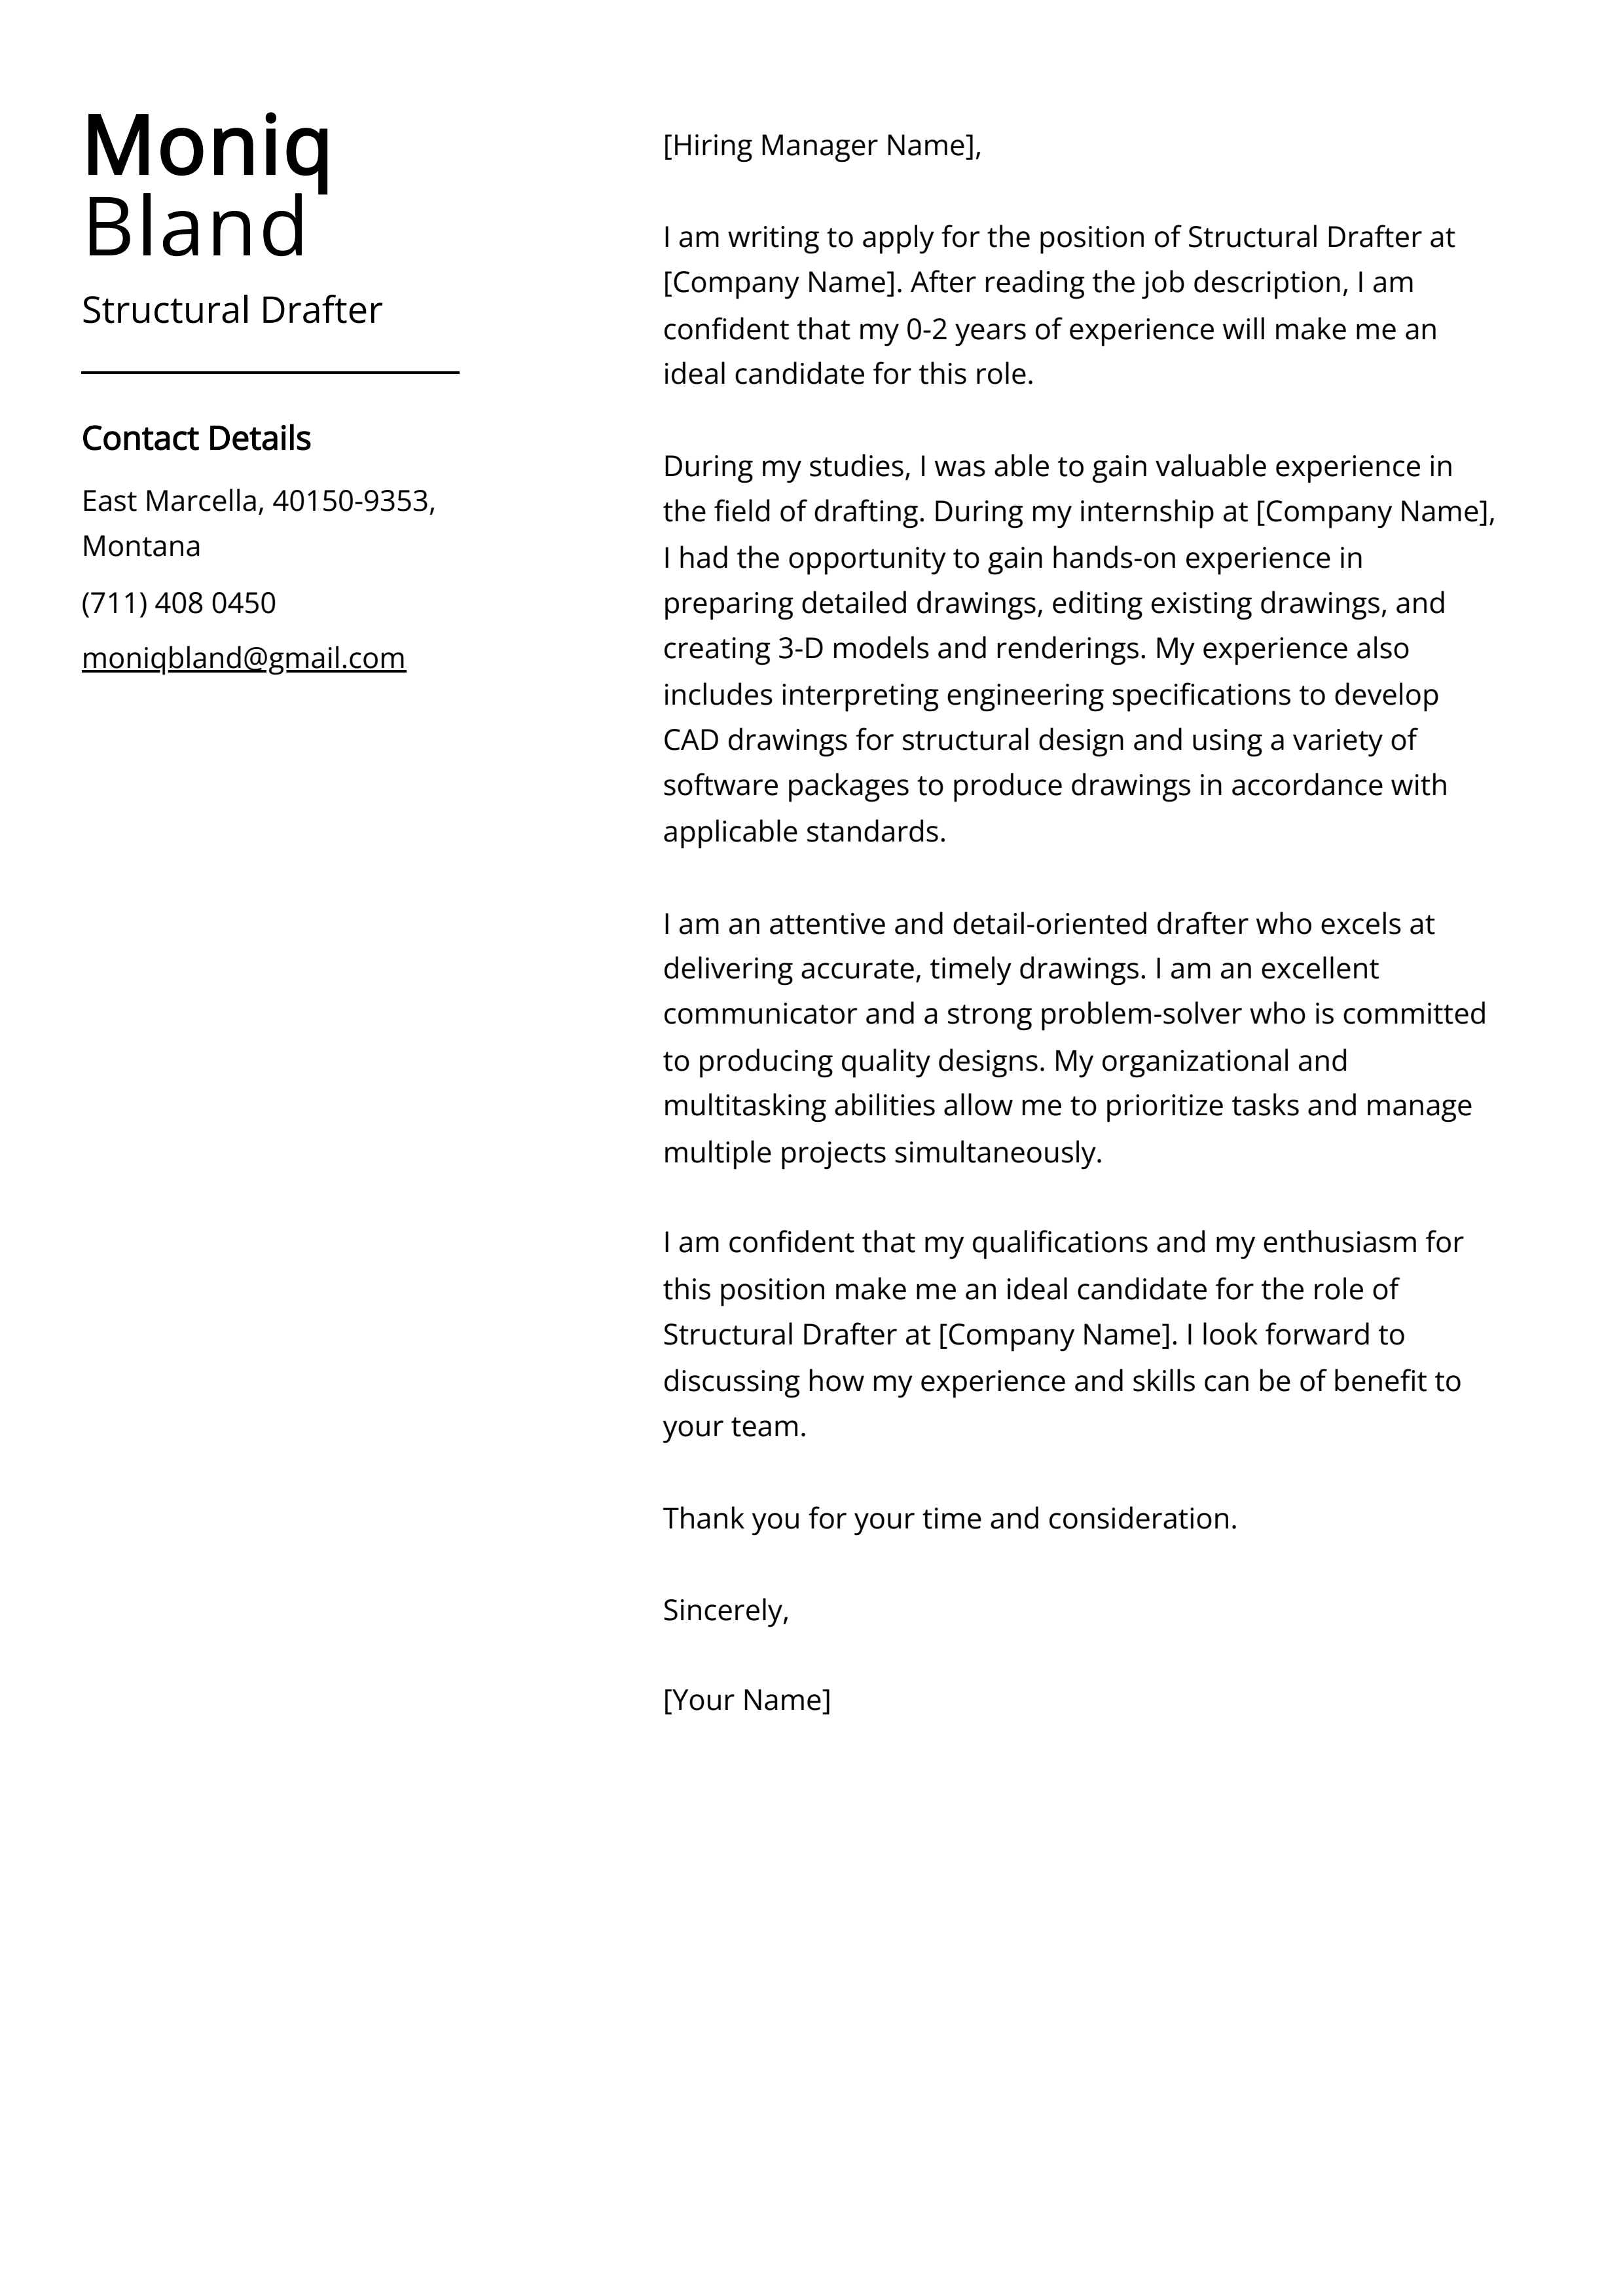 Structural Drafter Cover Letter Example